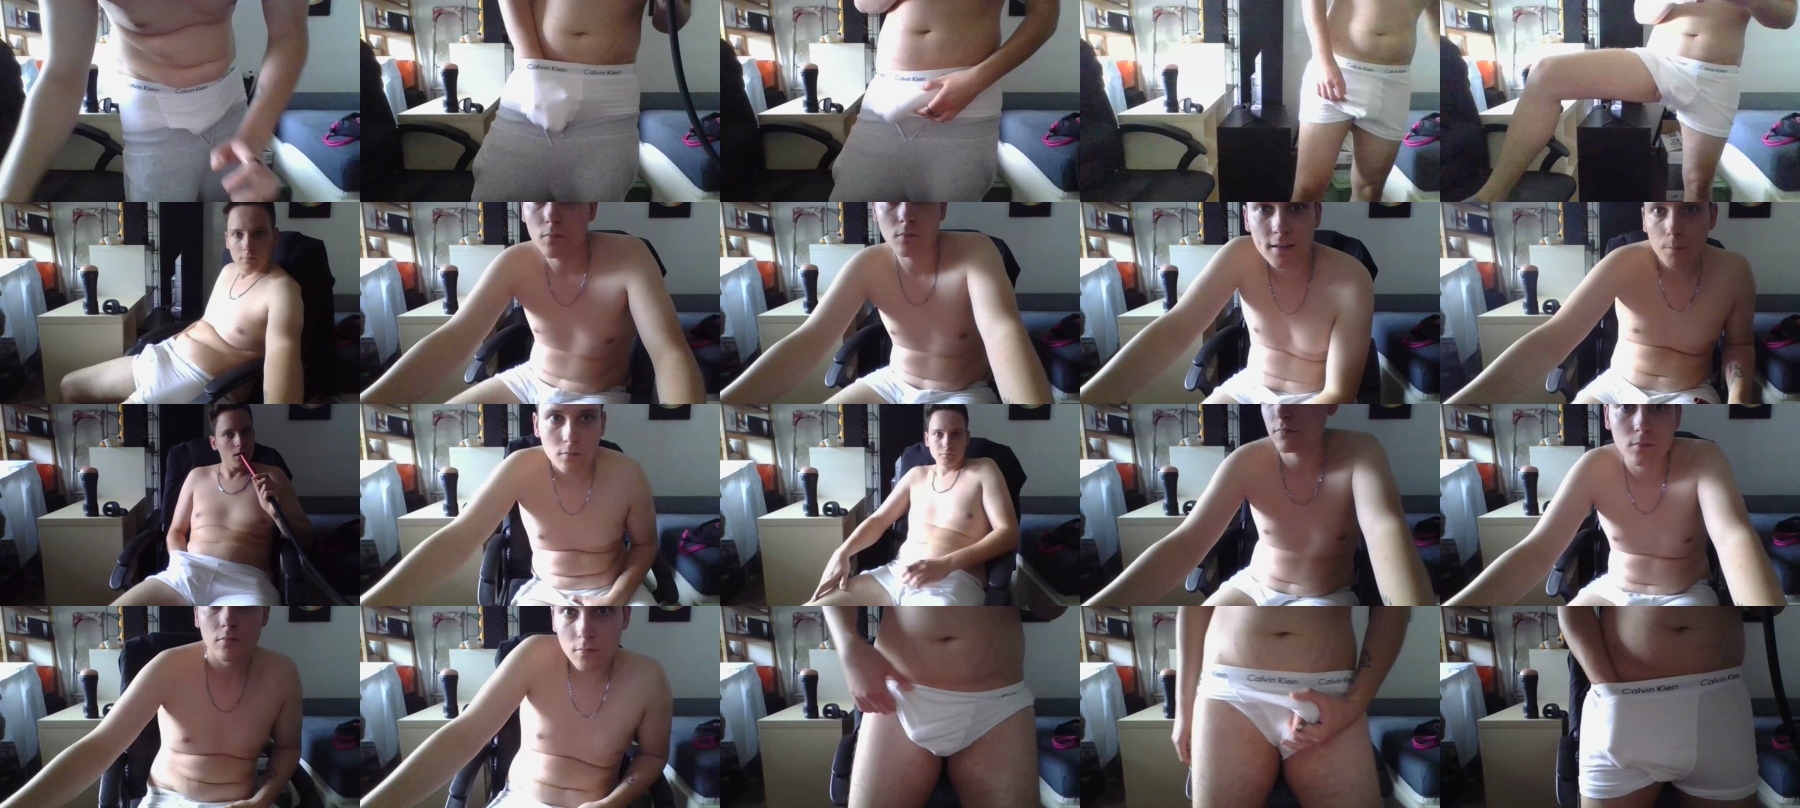 justin958  20-08-2021 Recorded Video Webcam